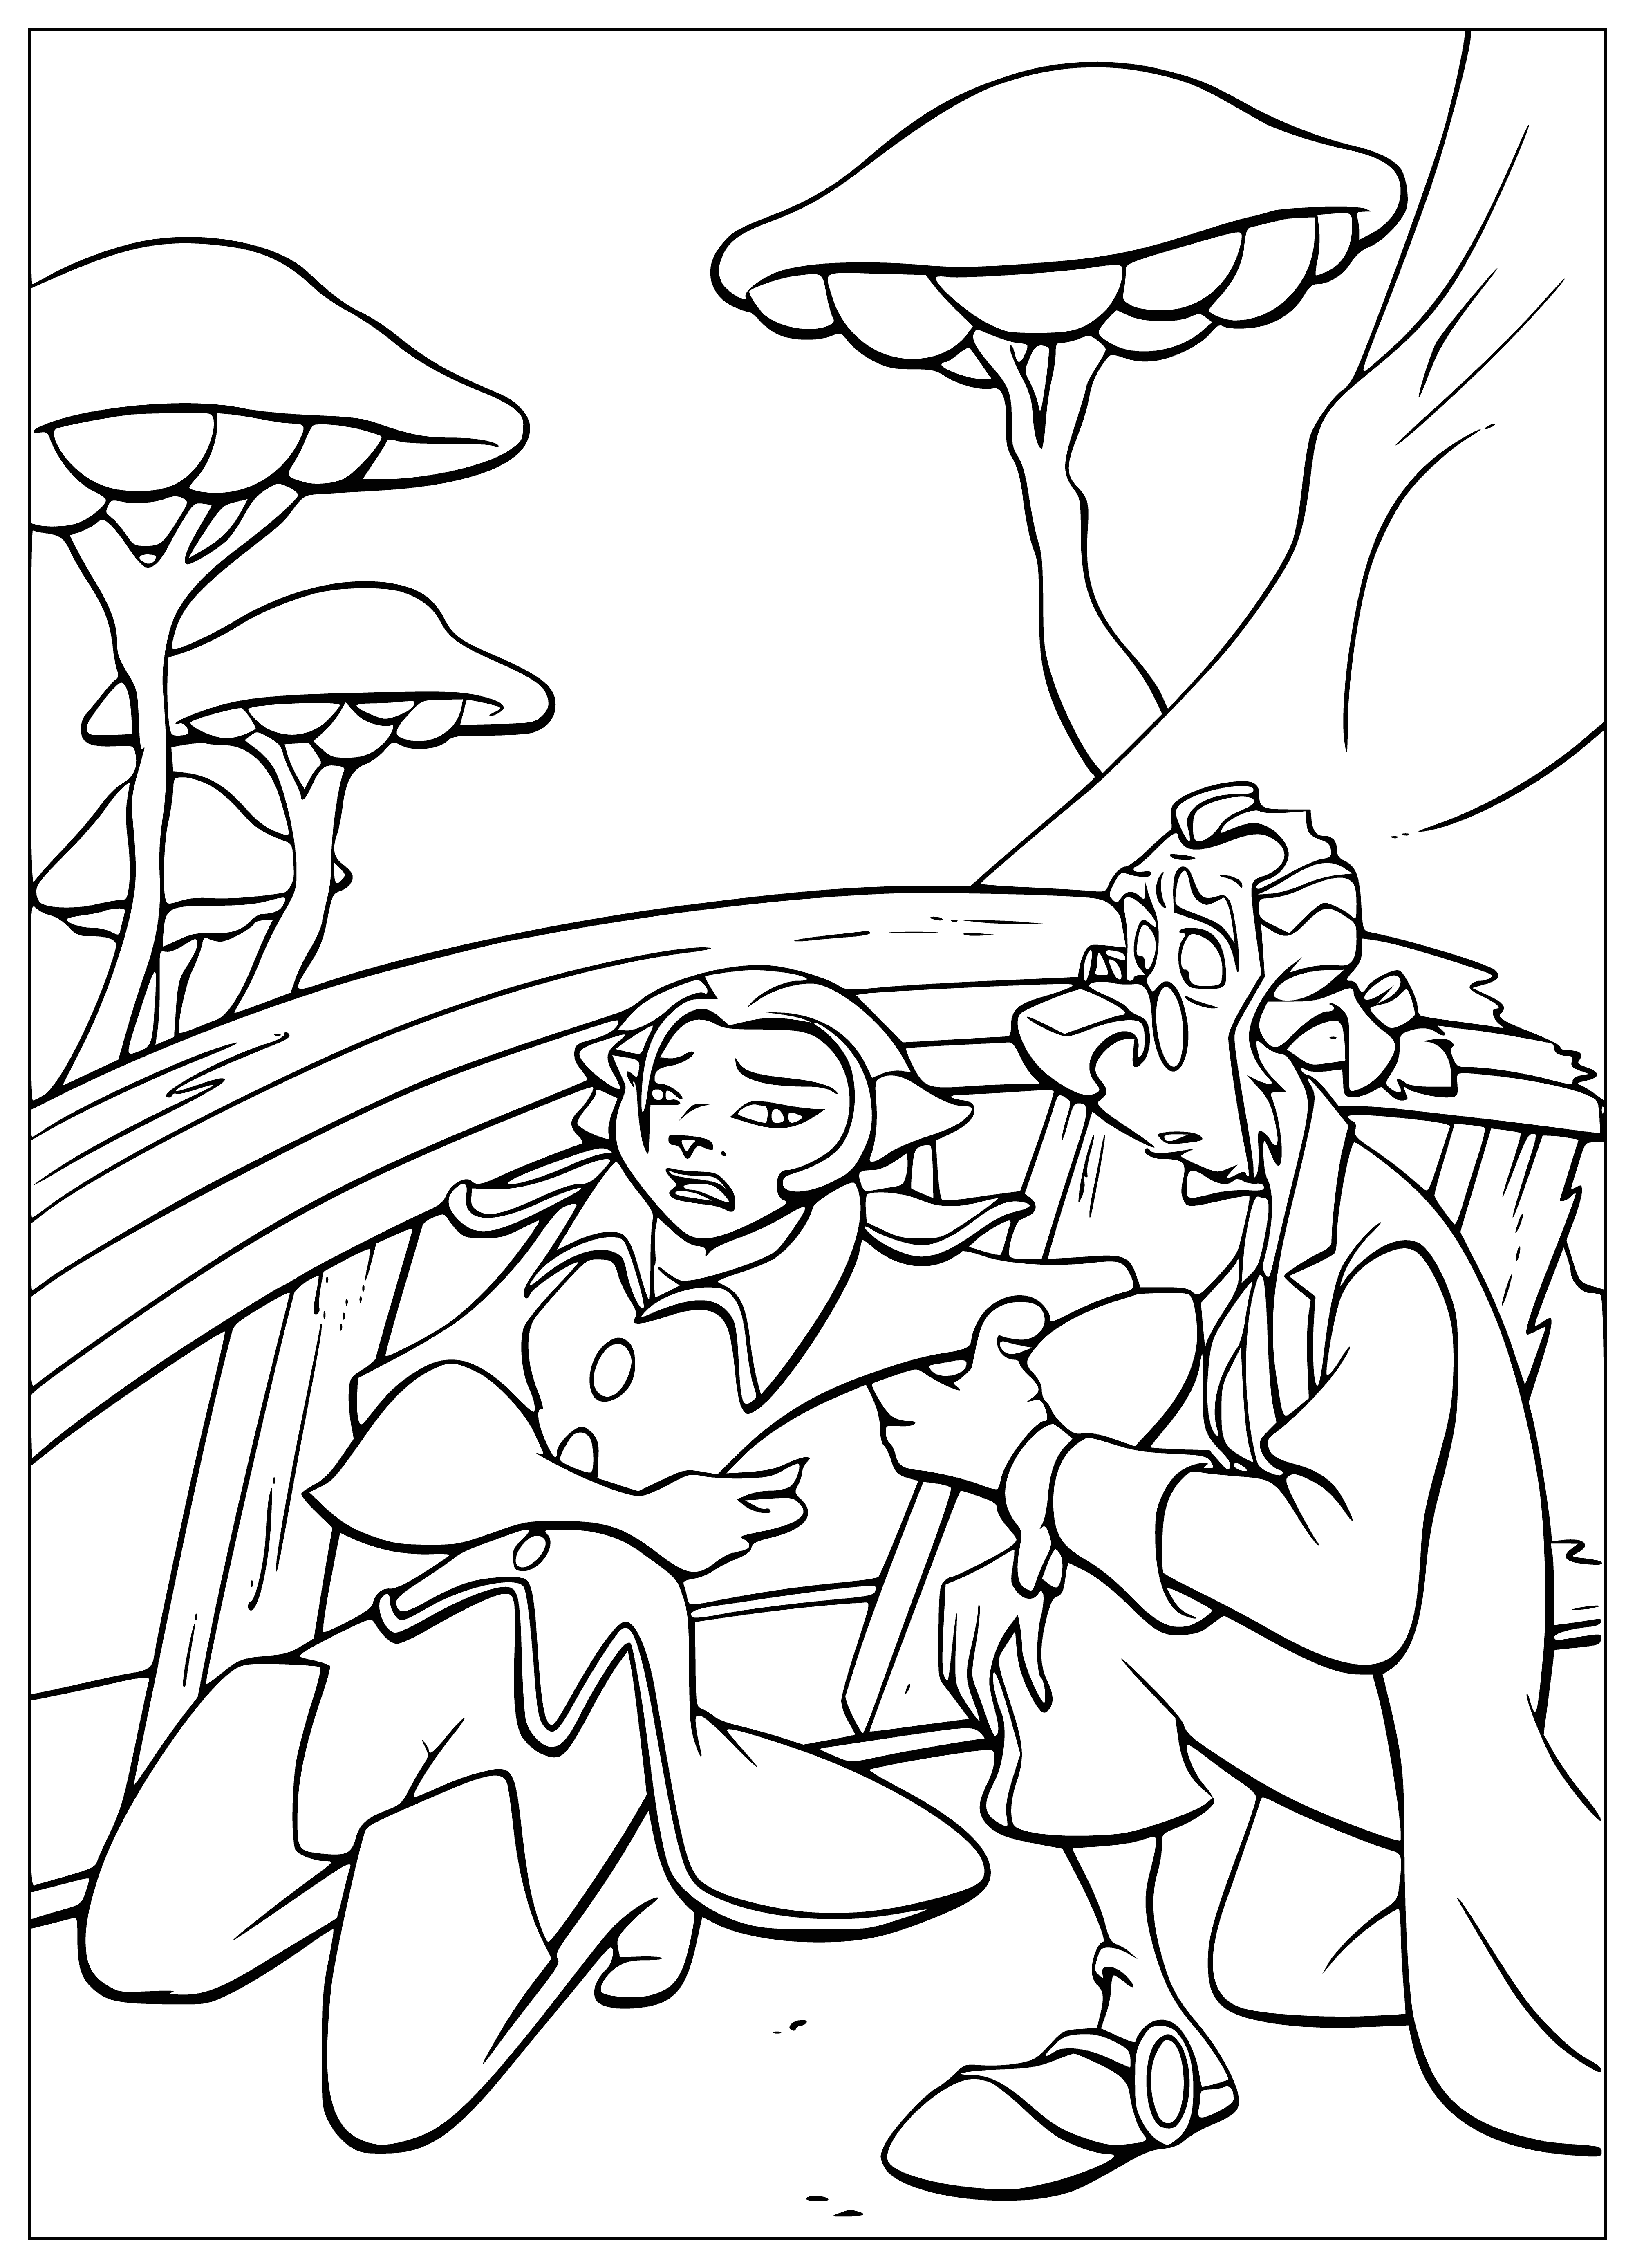 coloring page: Captain wounded in battle w/ space pirates; being cared for by concerned mate, pale & sweaty, shirt stained with blood.